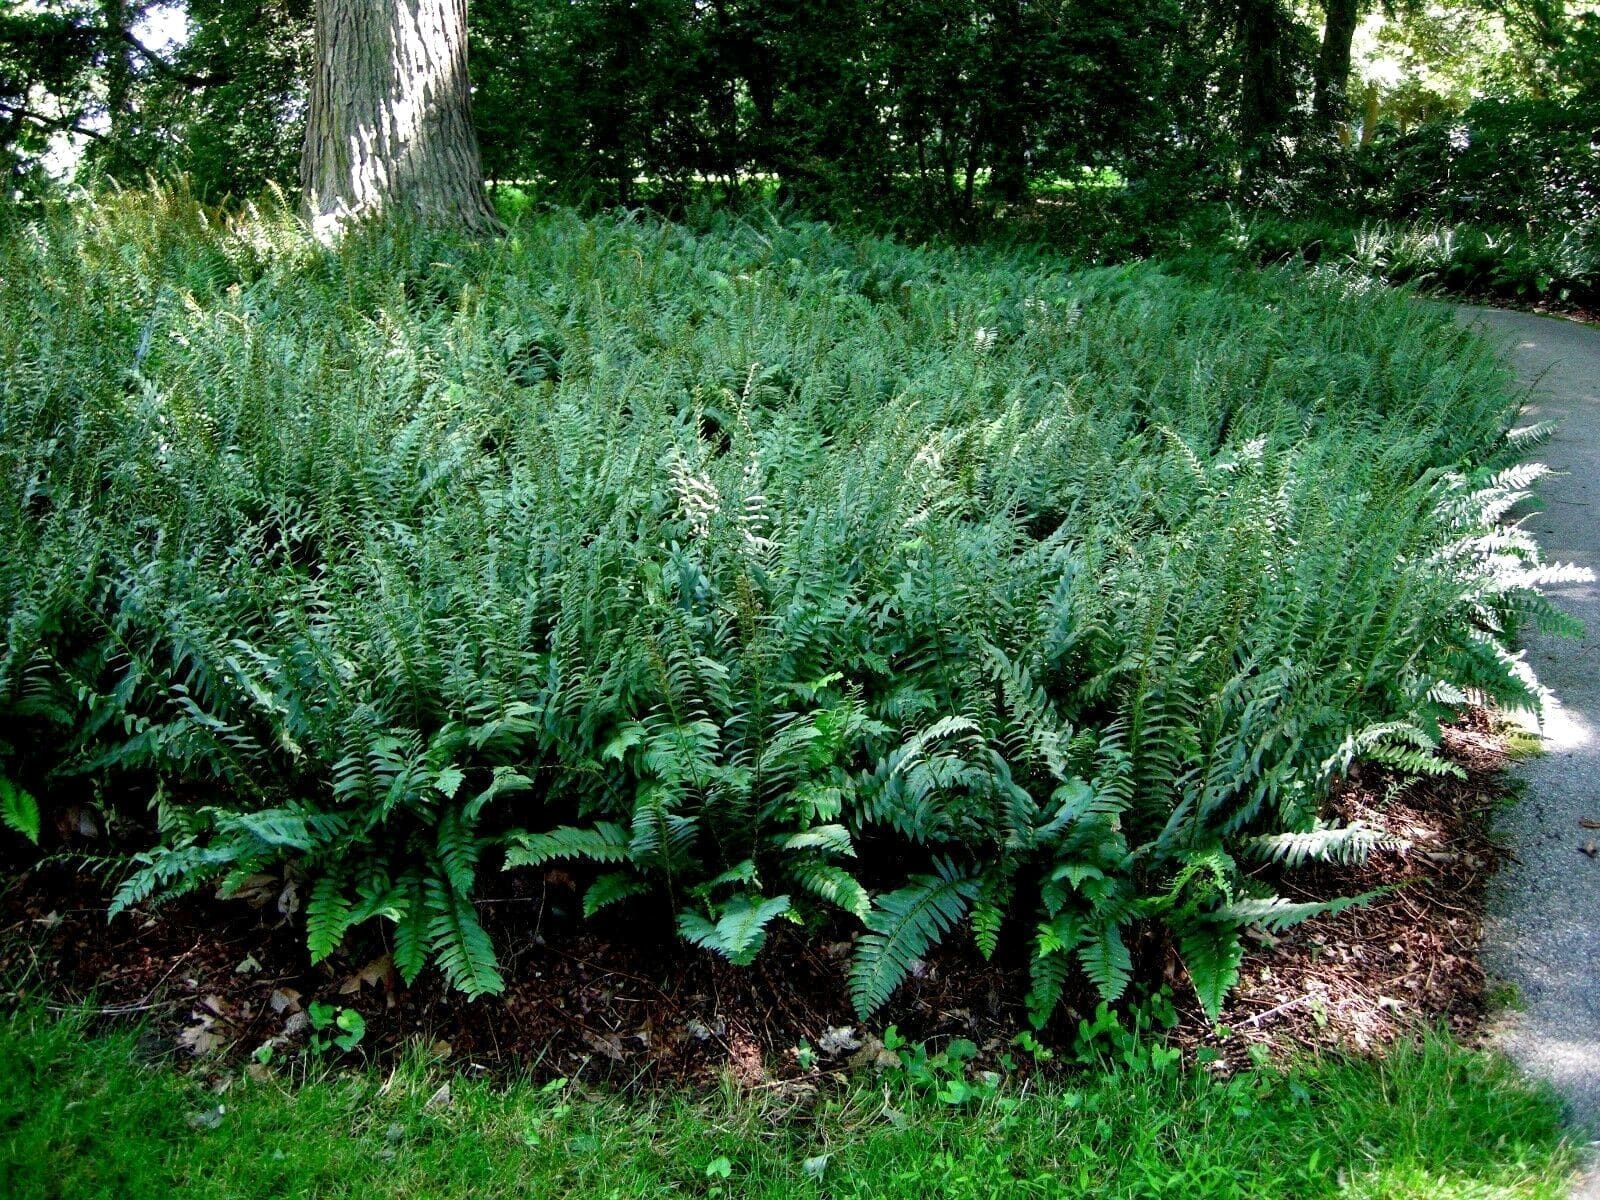 Christmas fern planting swath in a bed under a tree.